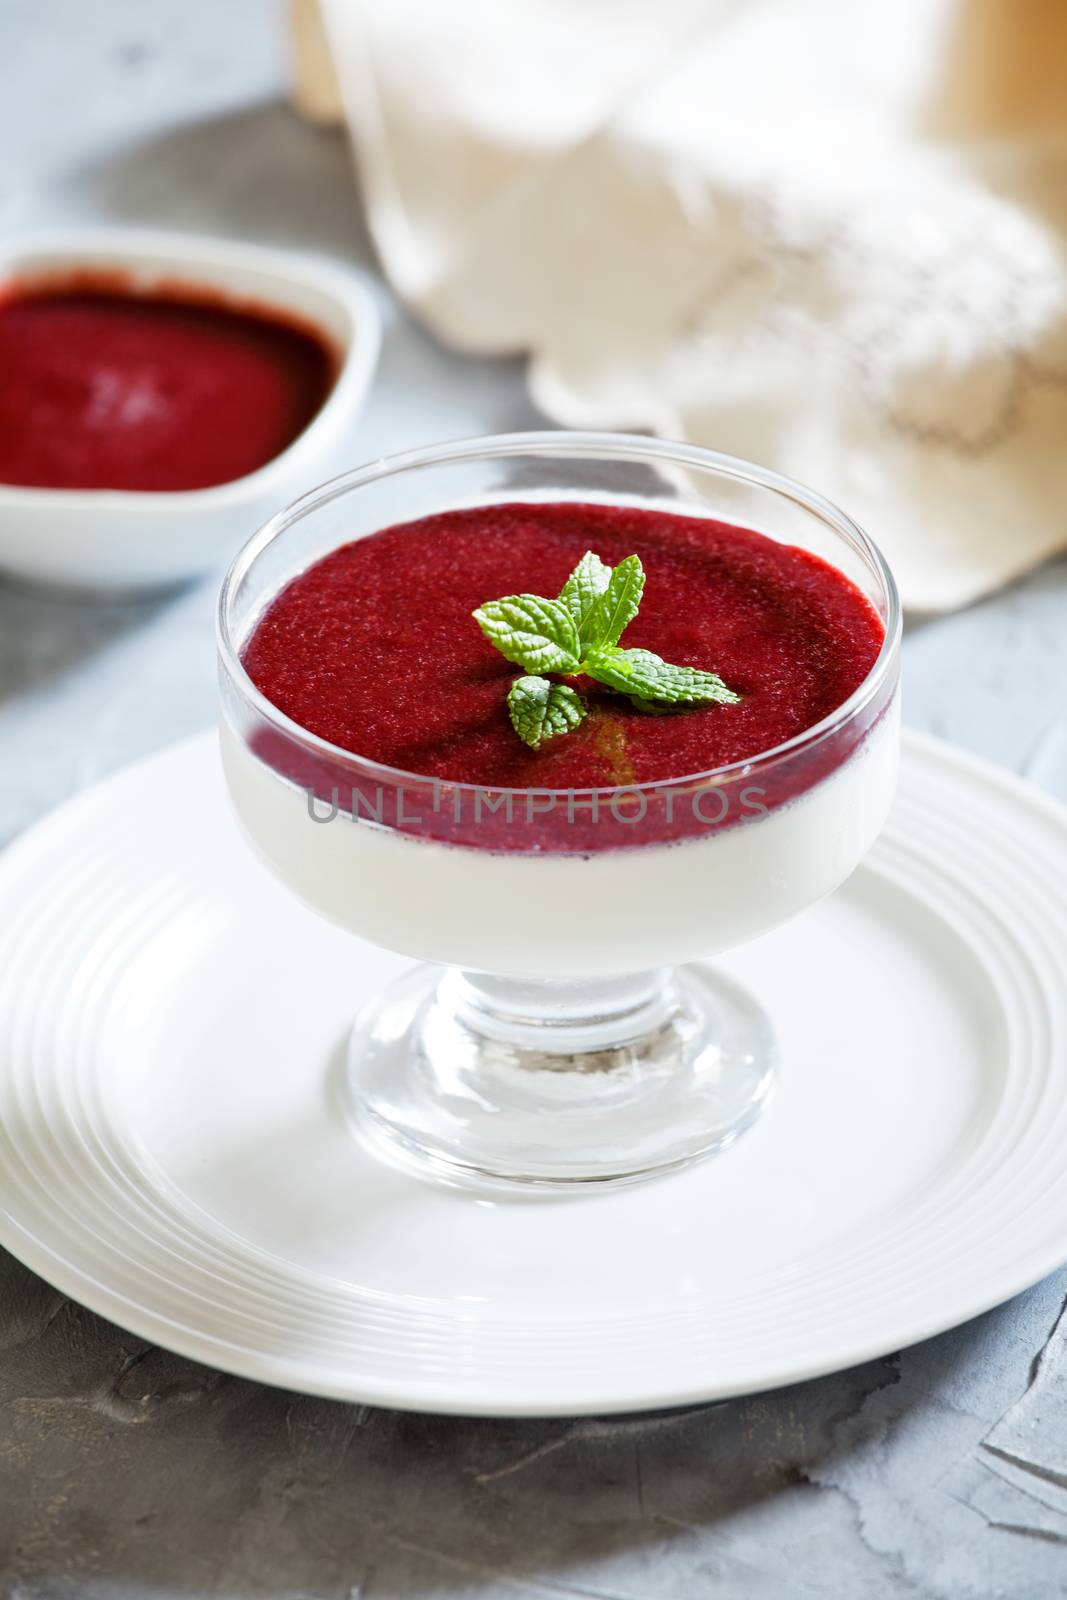 Homemade Panna Cotta With Cherry Syrup by mpessaris